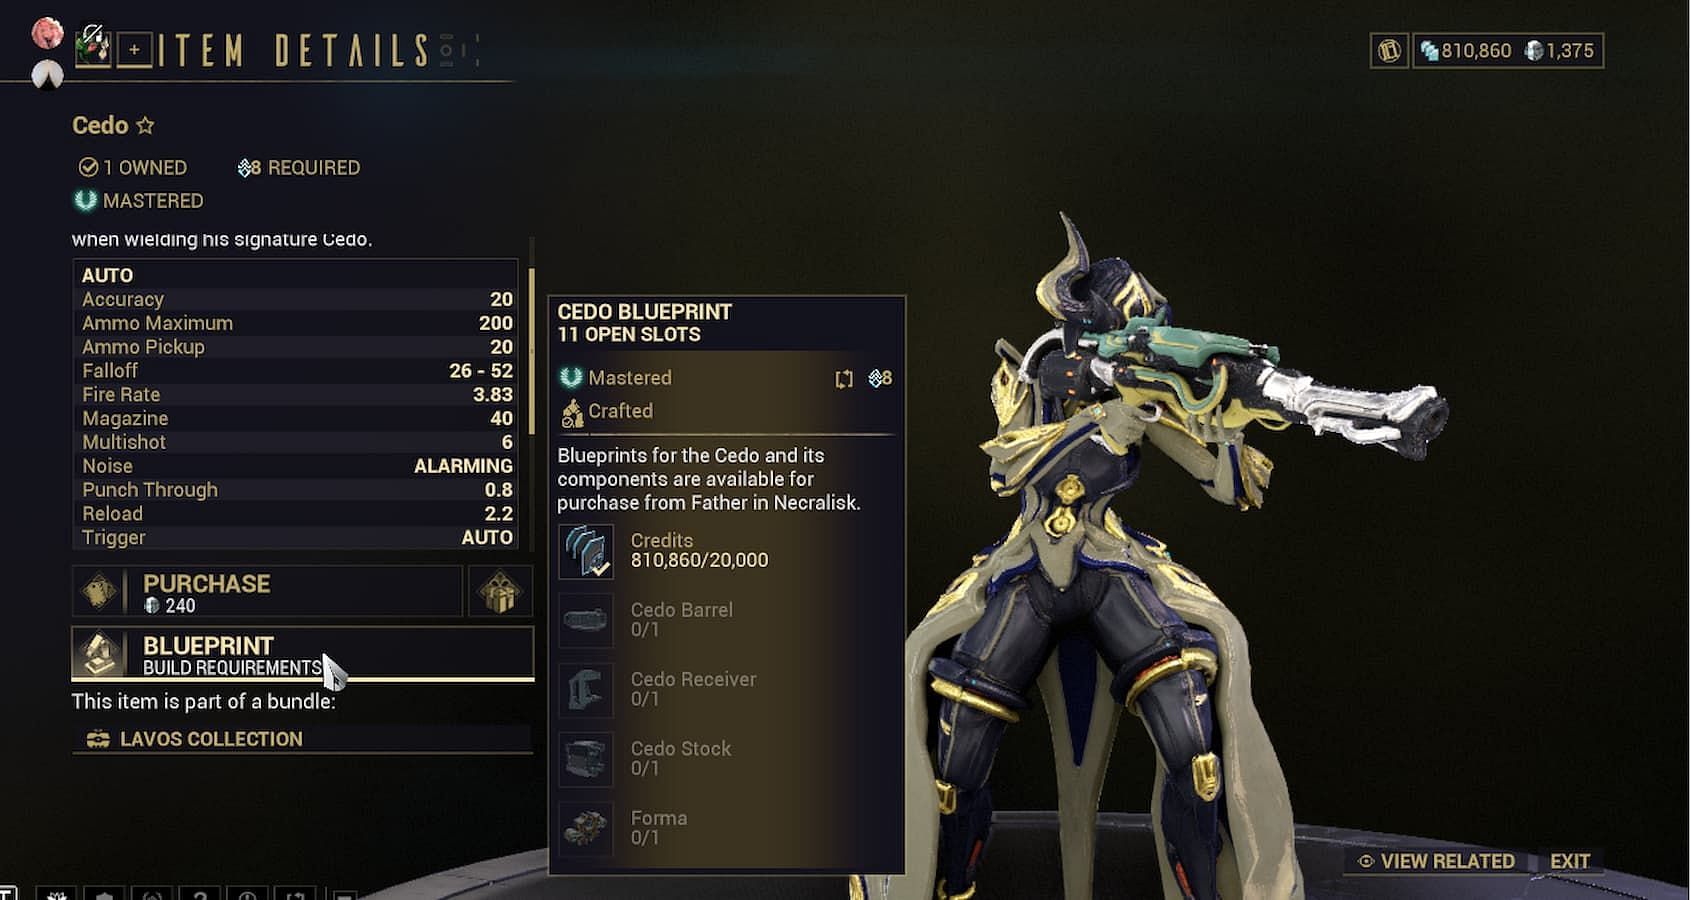 Cedo can be acquired from Father in Necralisk (Image via Digital Extremes)